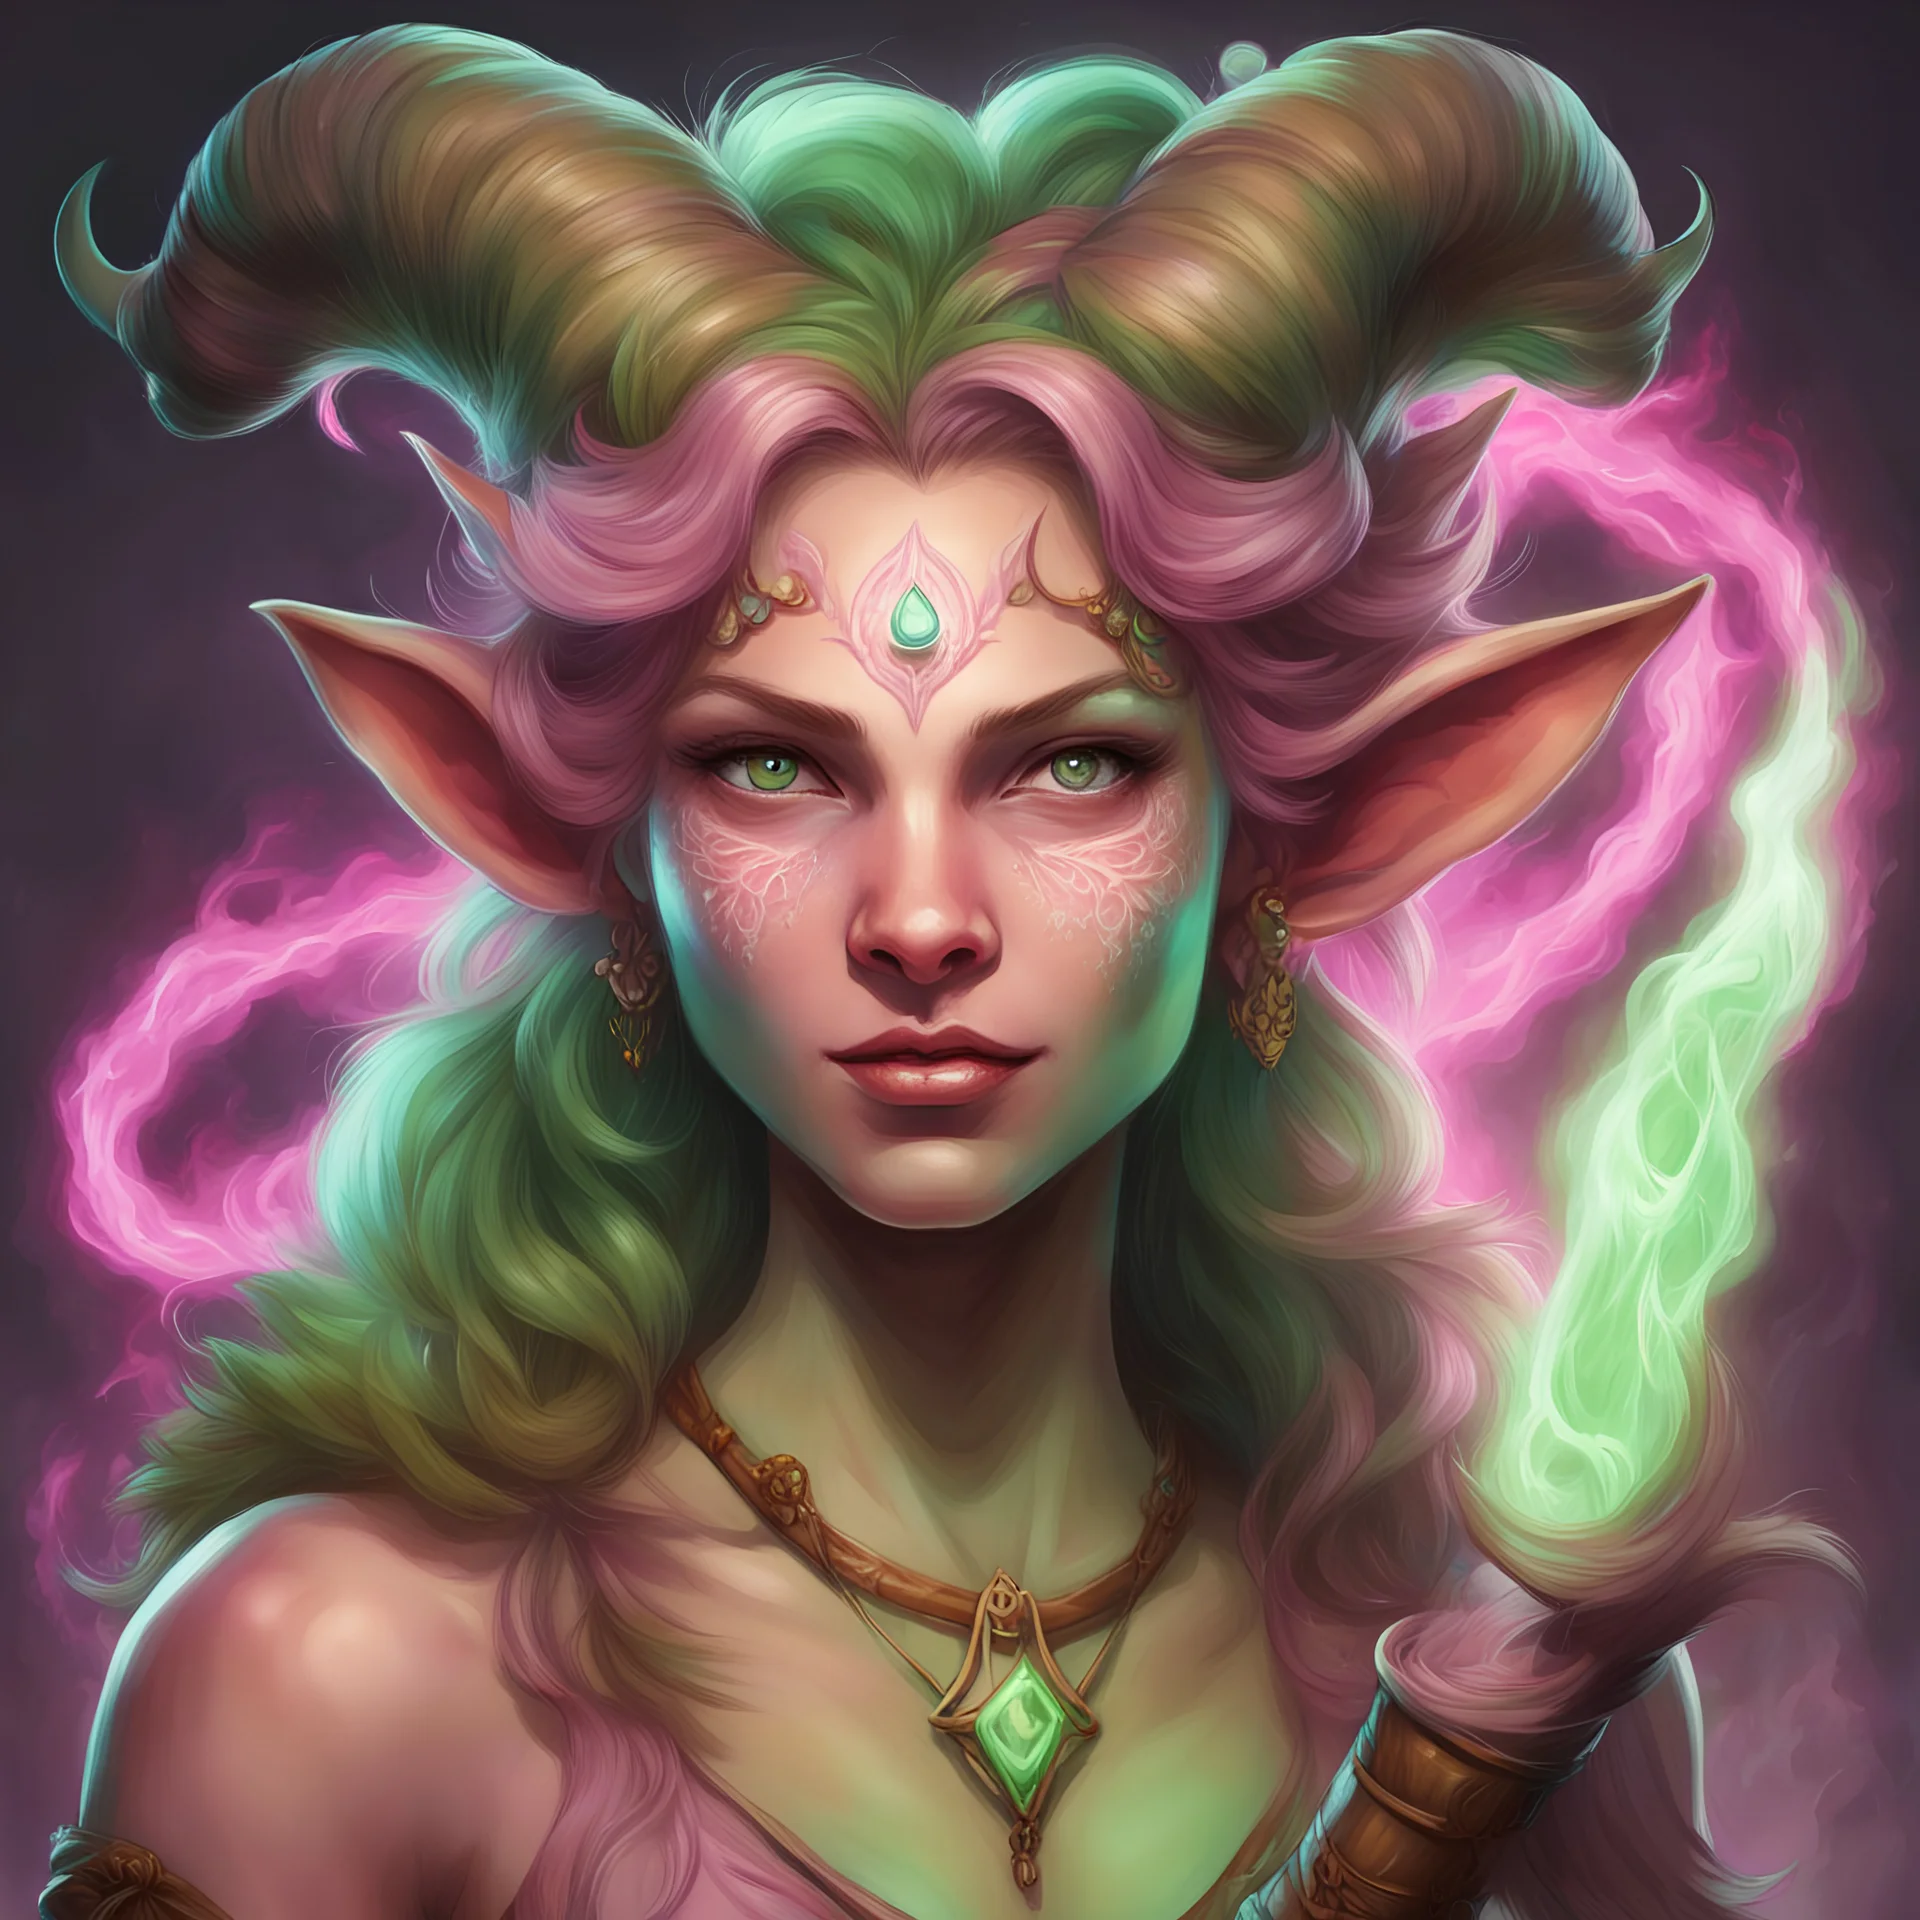 Generate a dungeons and dragons character portrait of a female Satyr named Lara. She is a trickster and manipulative. She is a warlock blessed by a Fey patron and radiates her patron's magic. She is wielding a magical flute she uses when casting spells. She radiates pink energy magic that is visible. Also make her flute visible. She is wearing green and brown clothes.